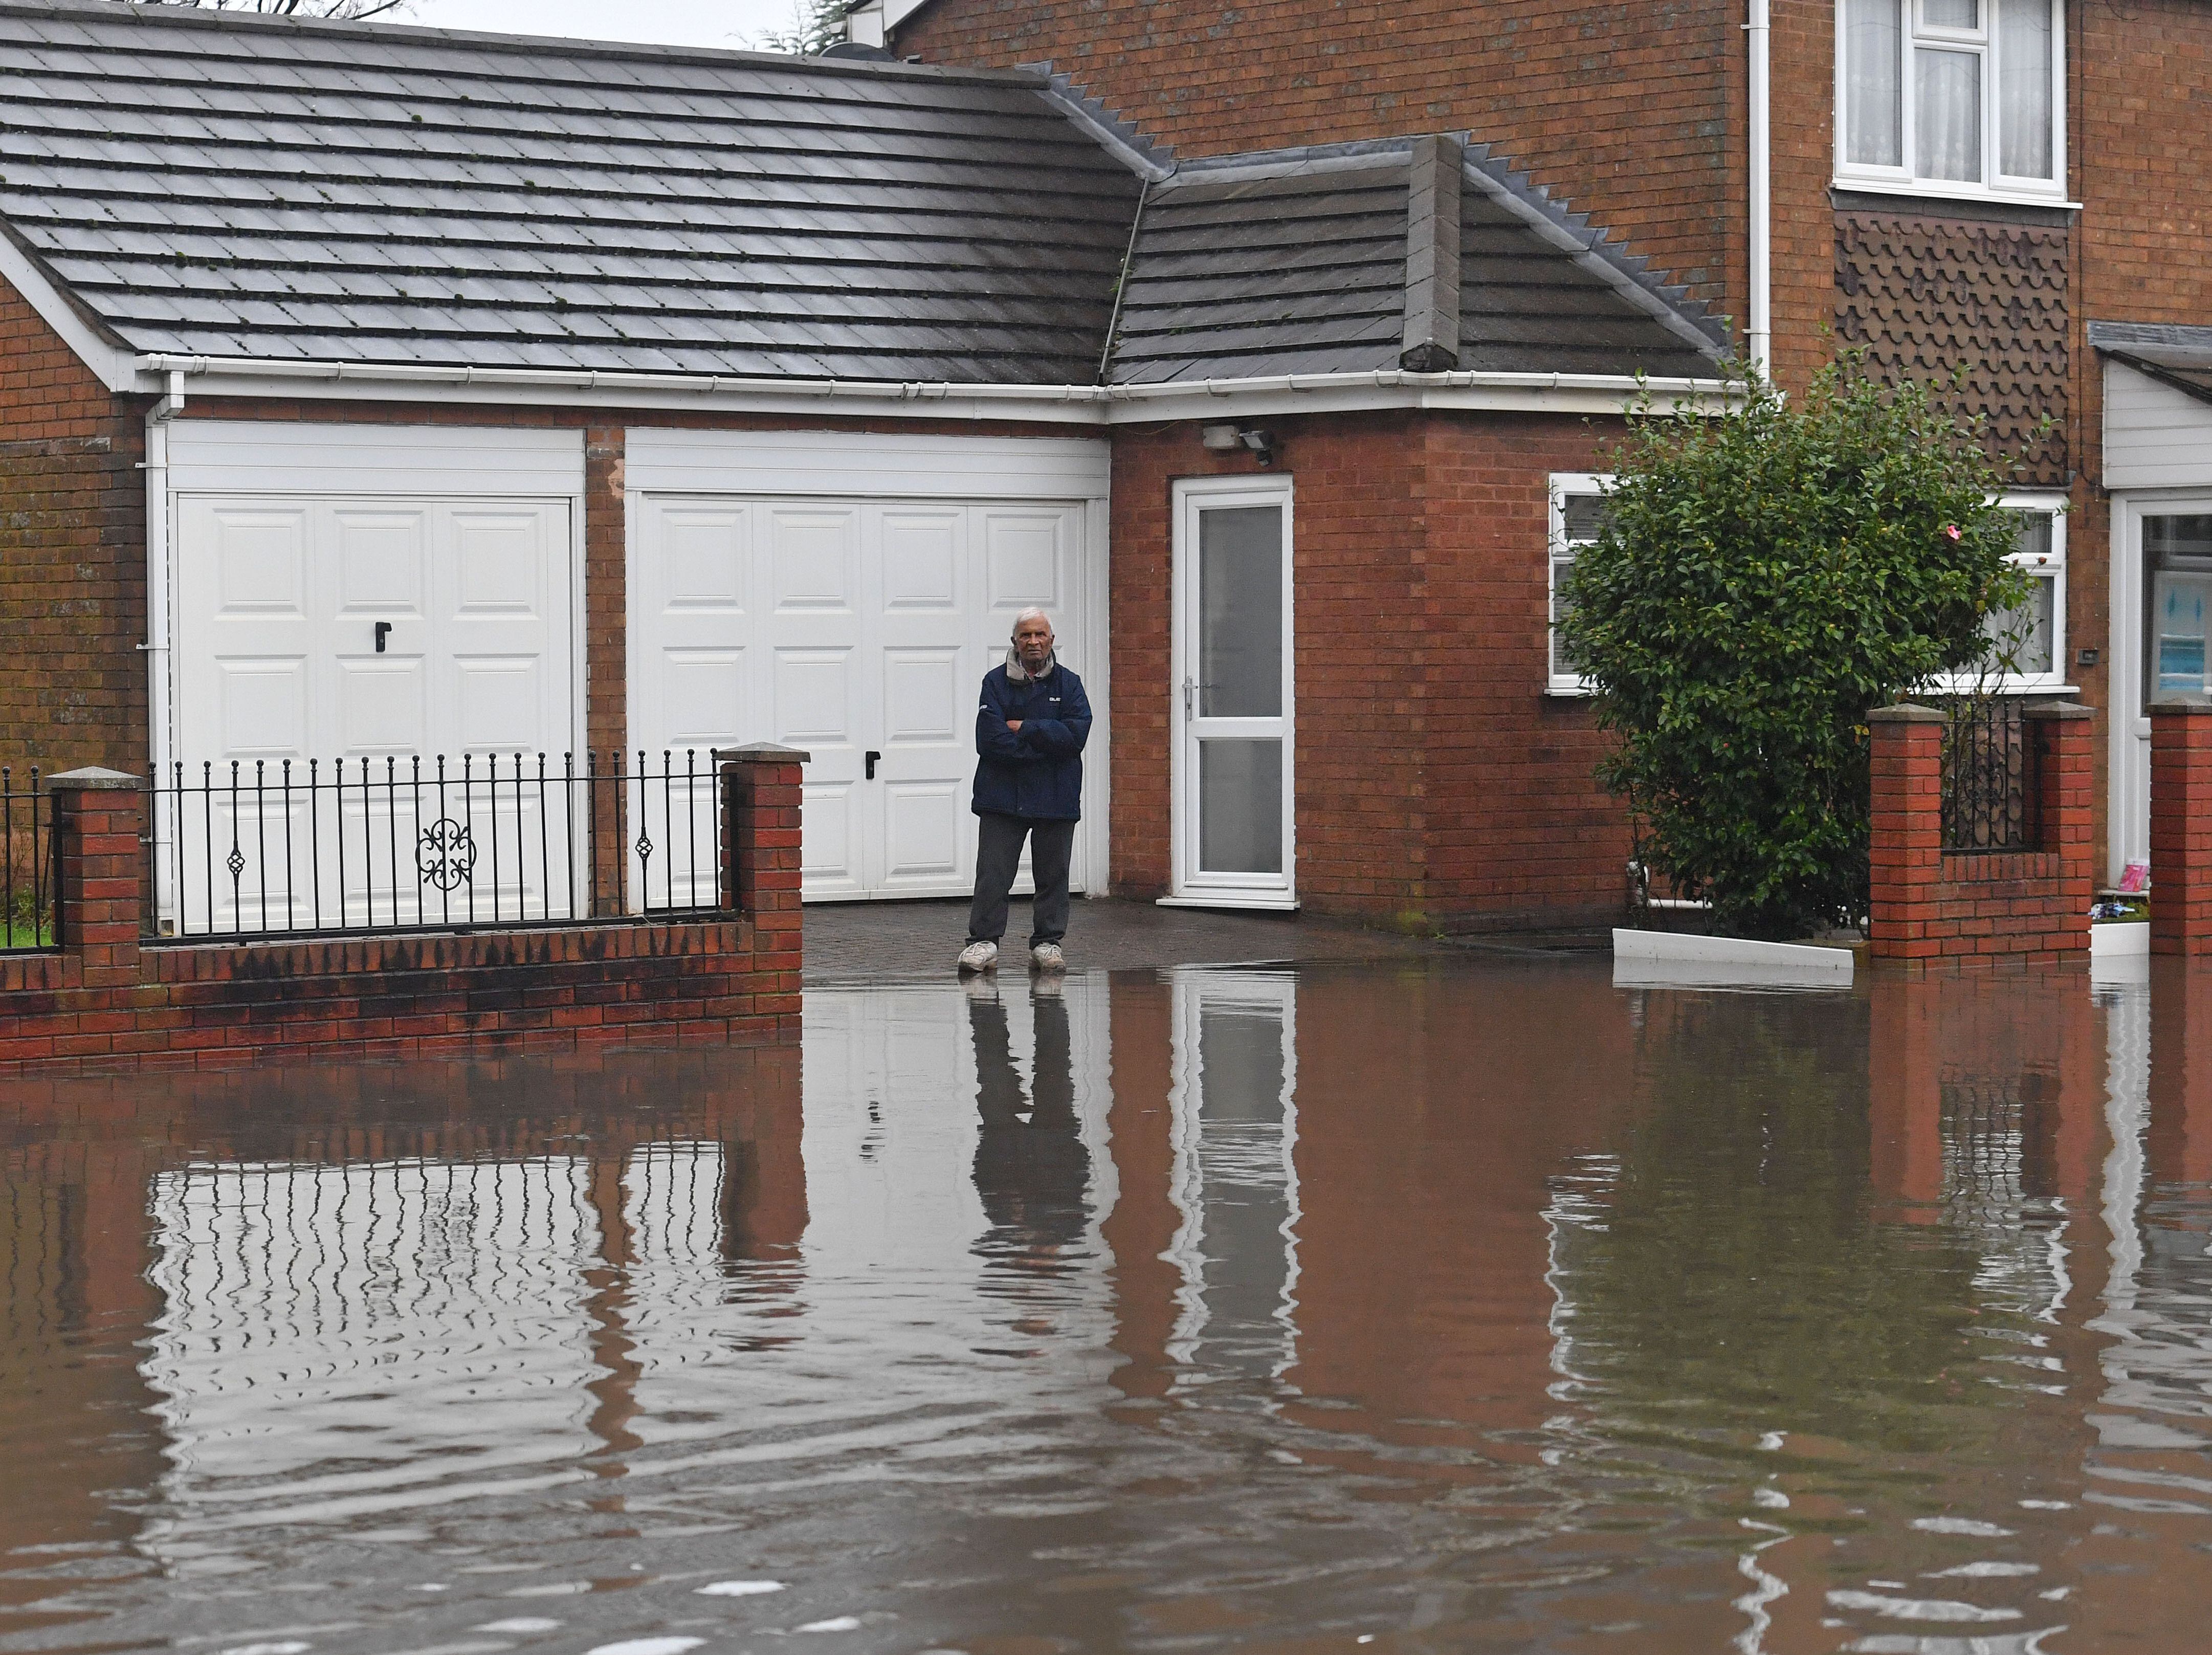 Blocked drain blamed as heavy rain brings yet more flooding to West Bromwich street

 